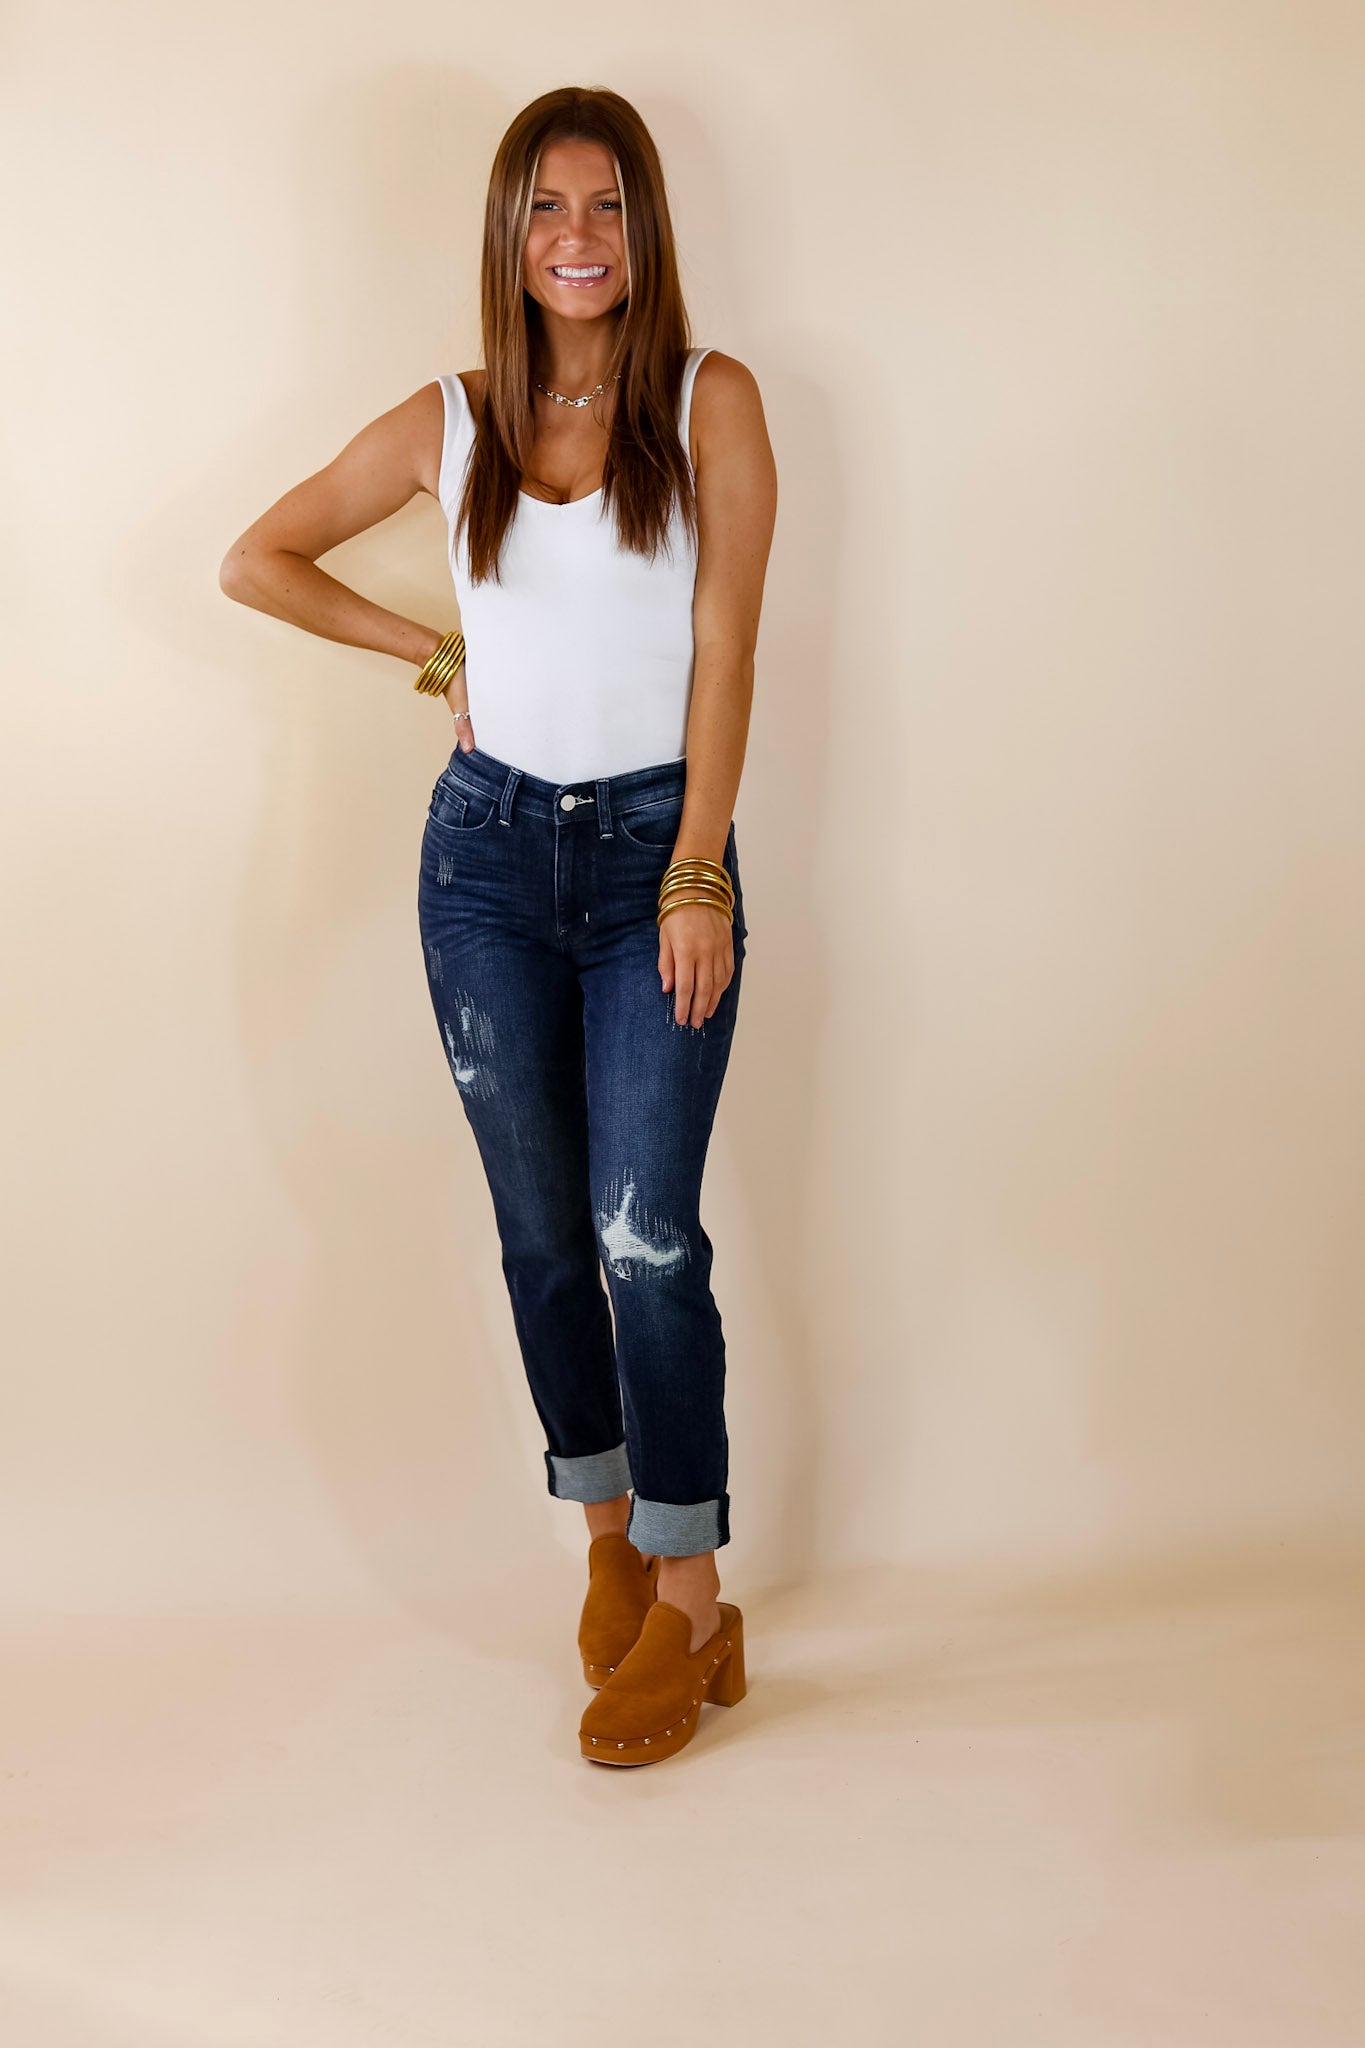 Judy Blue | Cute Energy Cuffed Jeans with Distressed Stitching in Dark Wash - Giddy Up Glamour Boutique